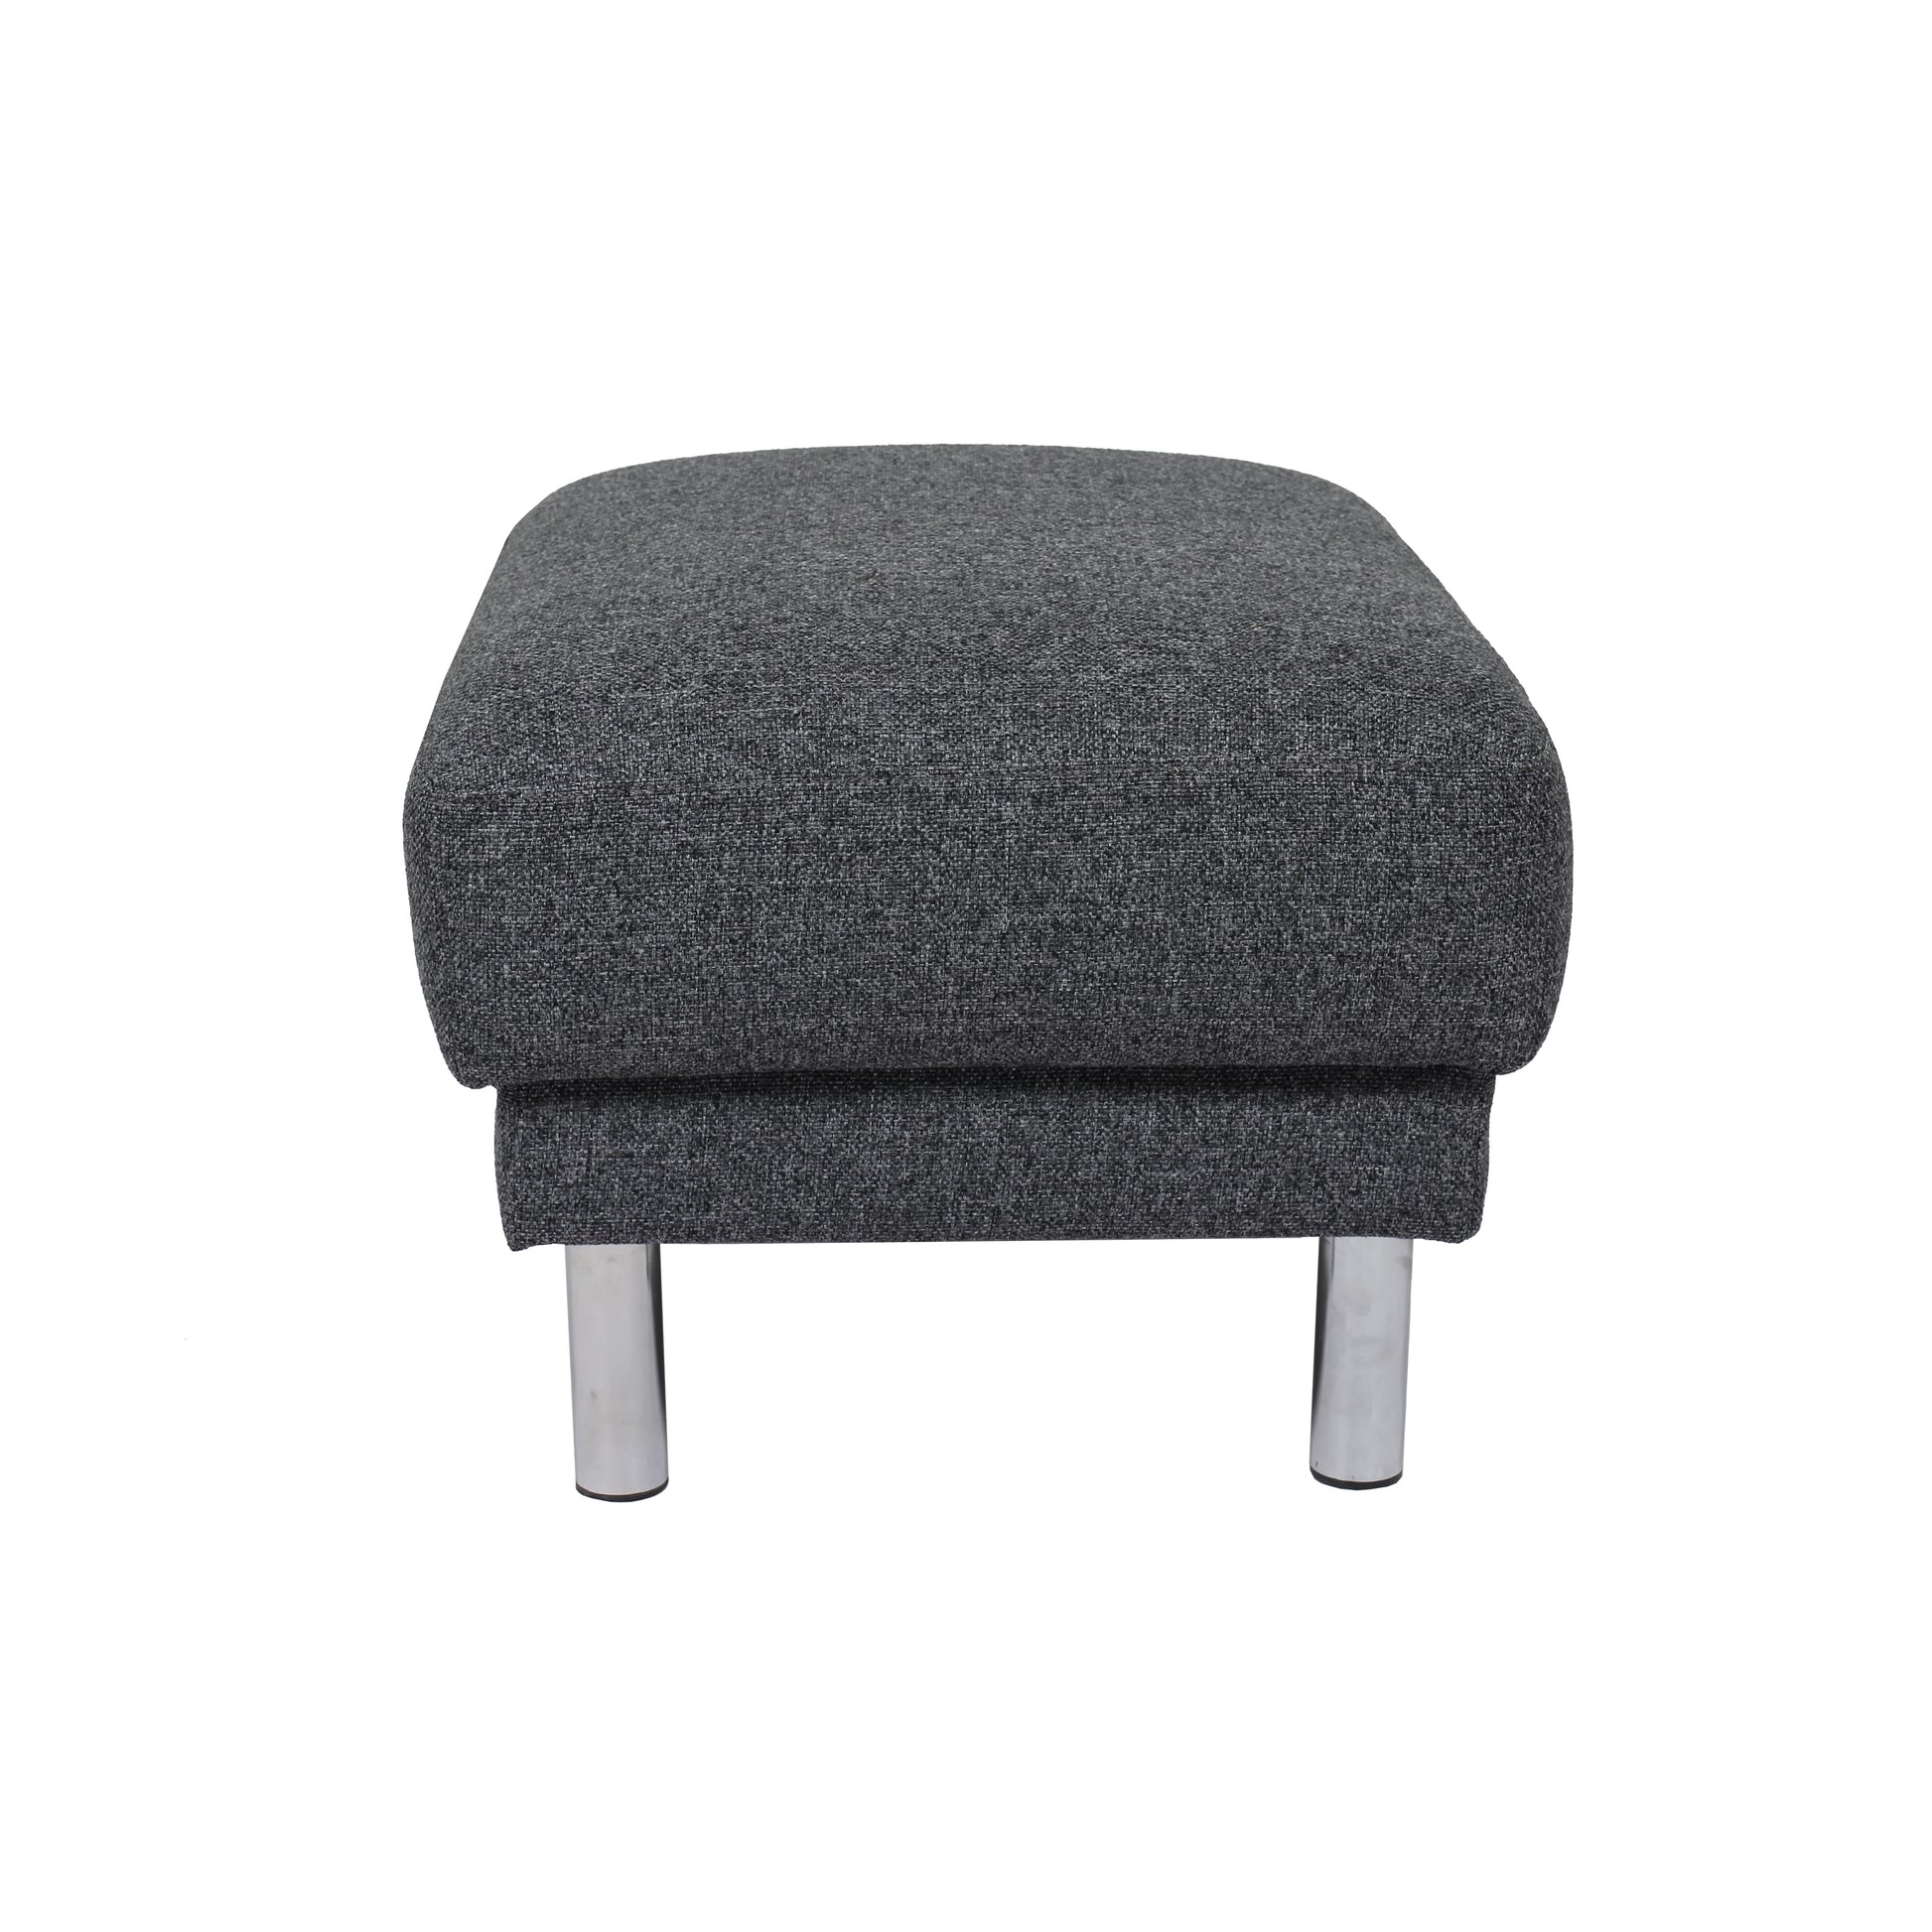 Cleveland  Footstool in Nova Anthracite